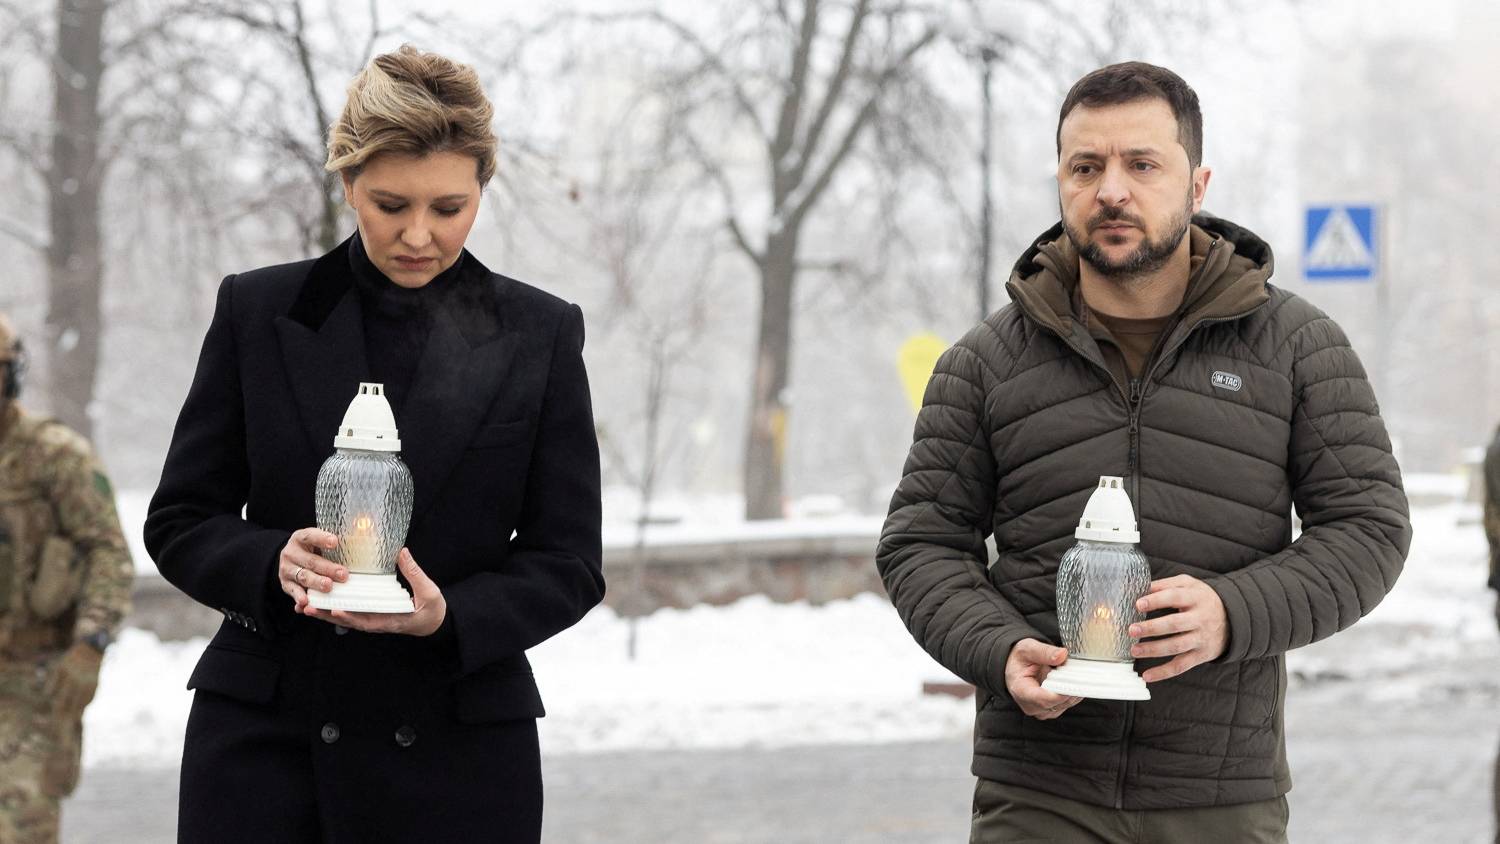 Ukraine's President Volodymyr Zelenskyy and wife Olena Zelenska attend a Kyiv commemoration ceremony at a monument to those killed during the Ukrainian pro-EU demonstrations in 2014. /Ukrainian Presidential Press Service/Handout.